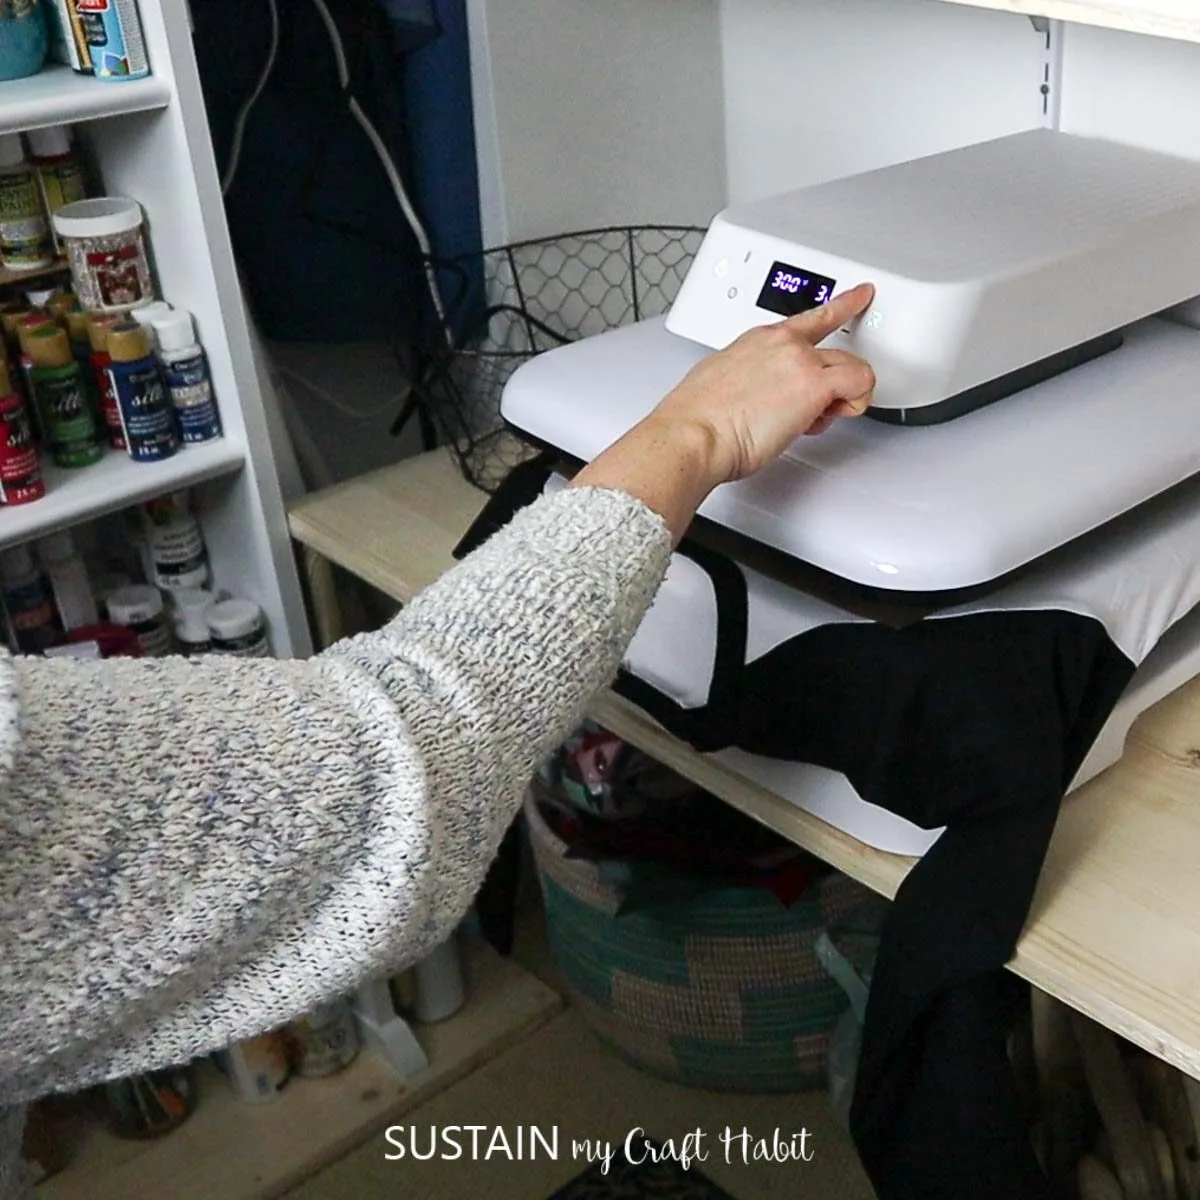 Tutorial: How to Use Pressing Pillows in Your Heat Press - Cutting for  Business